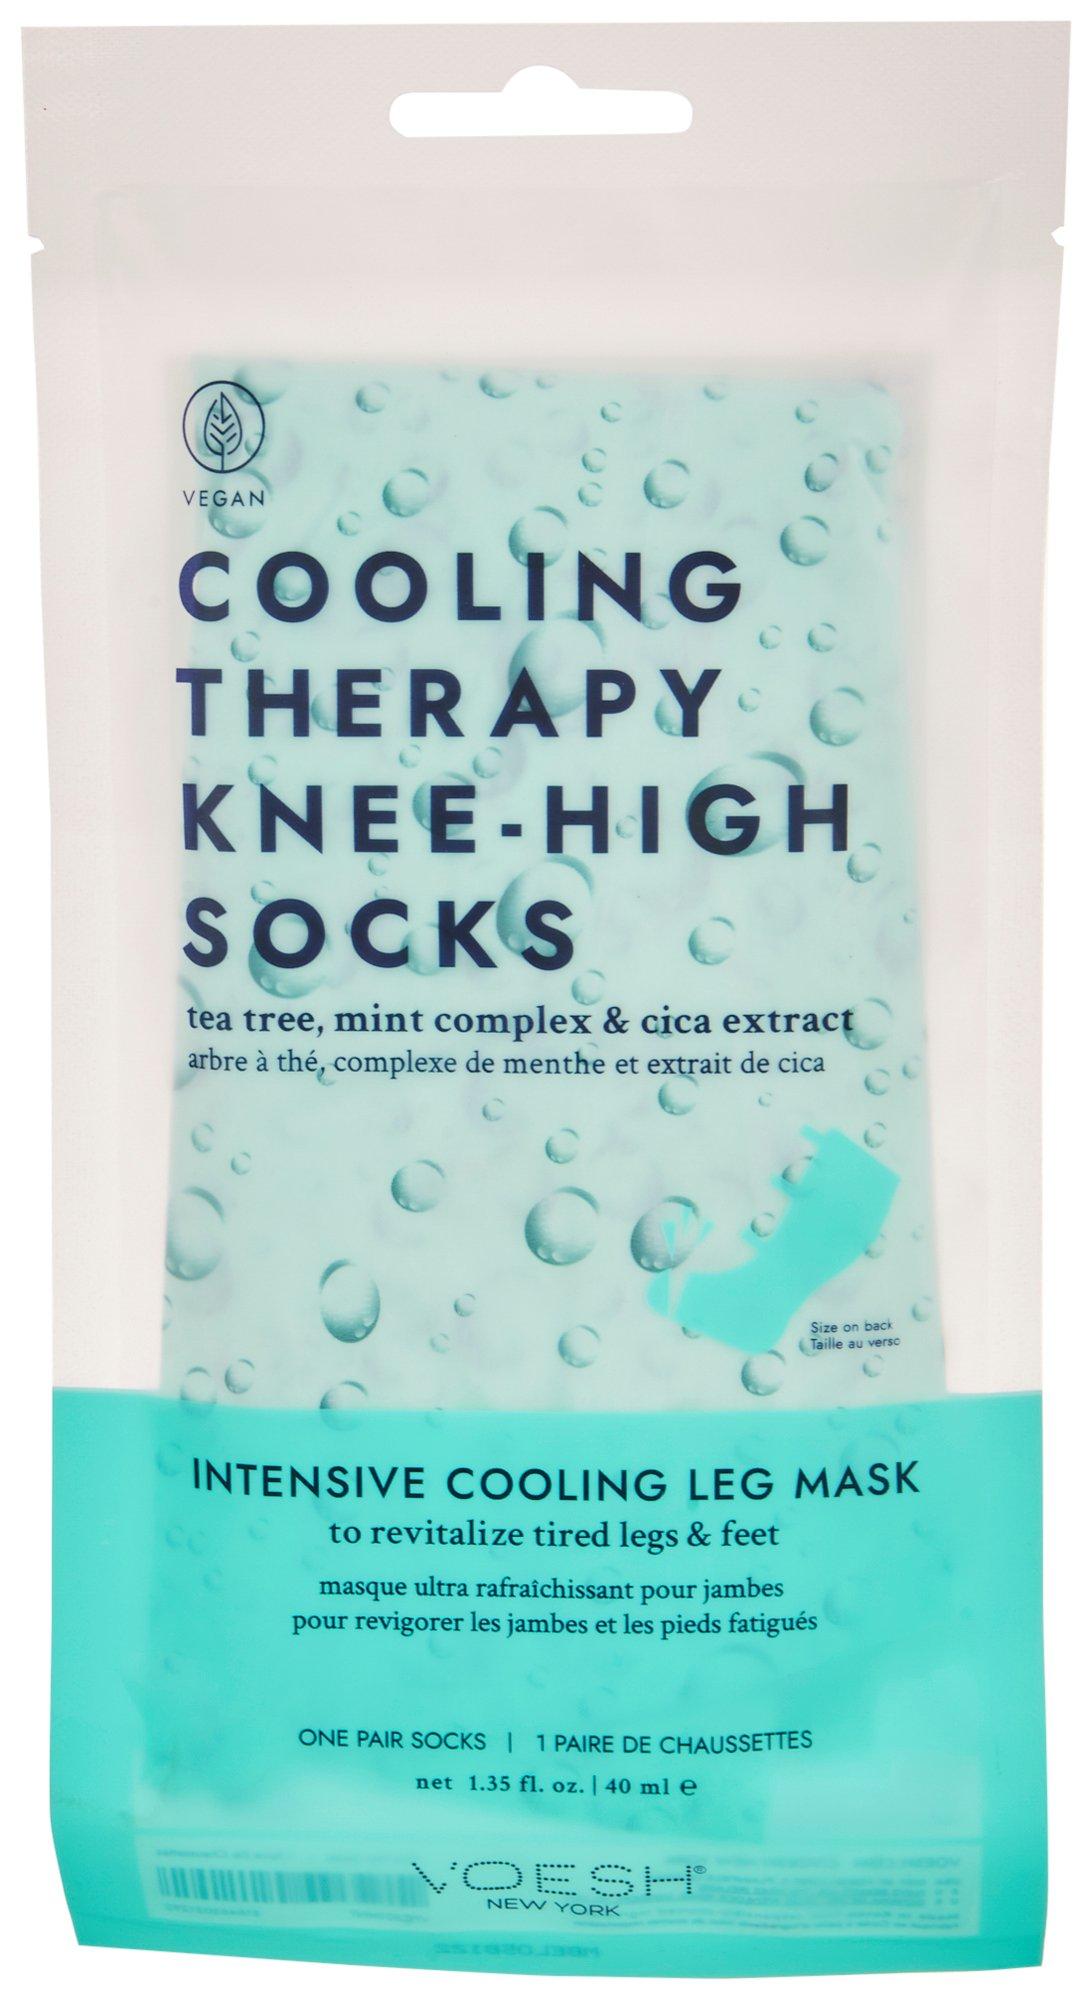 Cooling Therapy Knee-High Socks